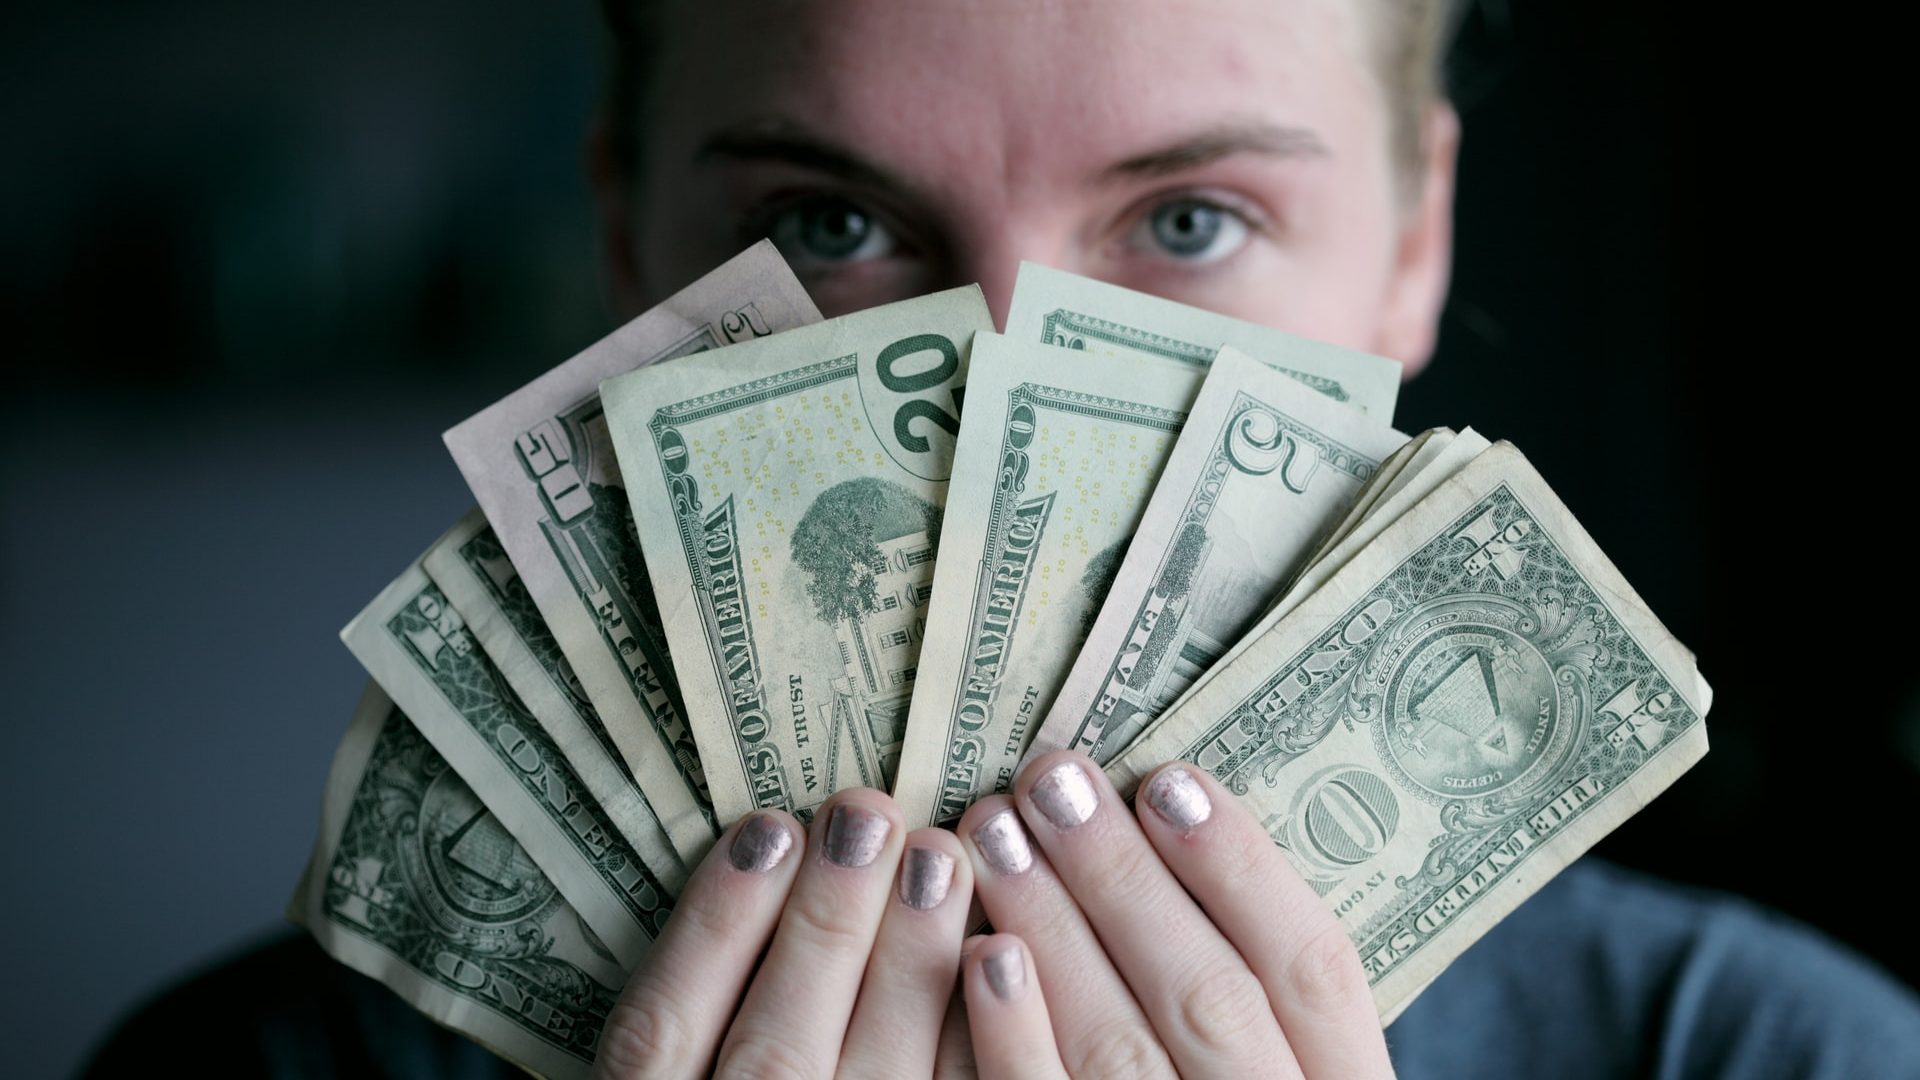 A woman holds various denominations of united states dollars in front of her face